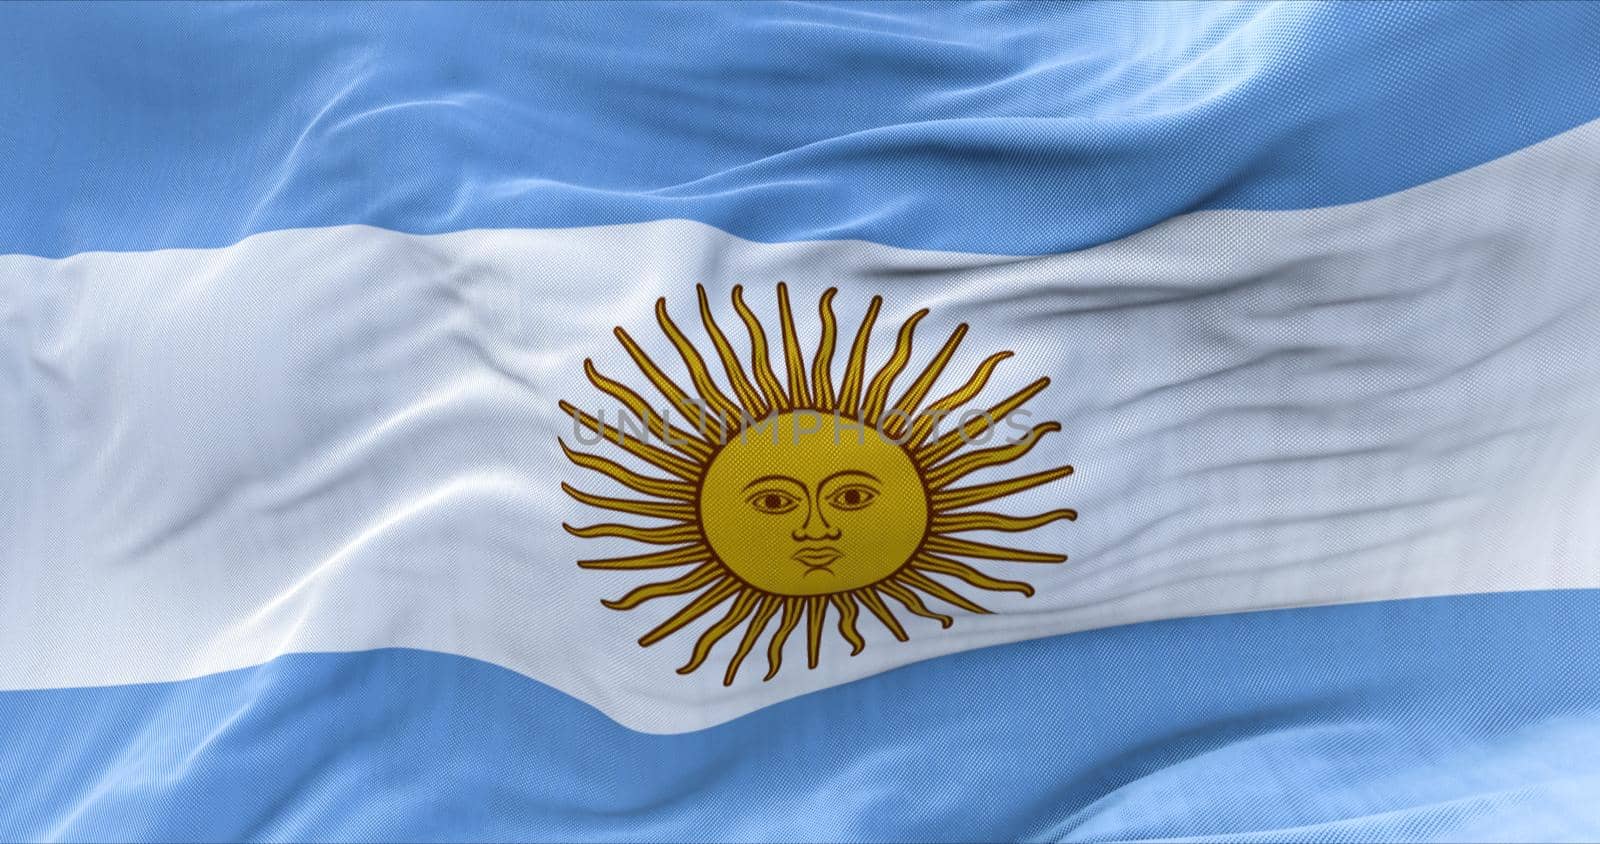 Close-up view of the national flag of Argentina waving in the wind. Horizontal striped flag in light blue color and the May Sun in the center. South American state. Democracy and independence. by rarrarorro